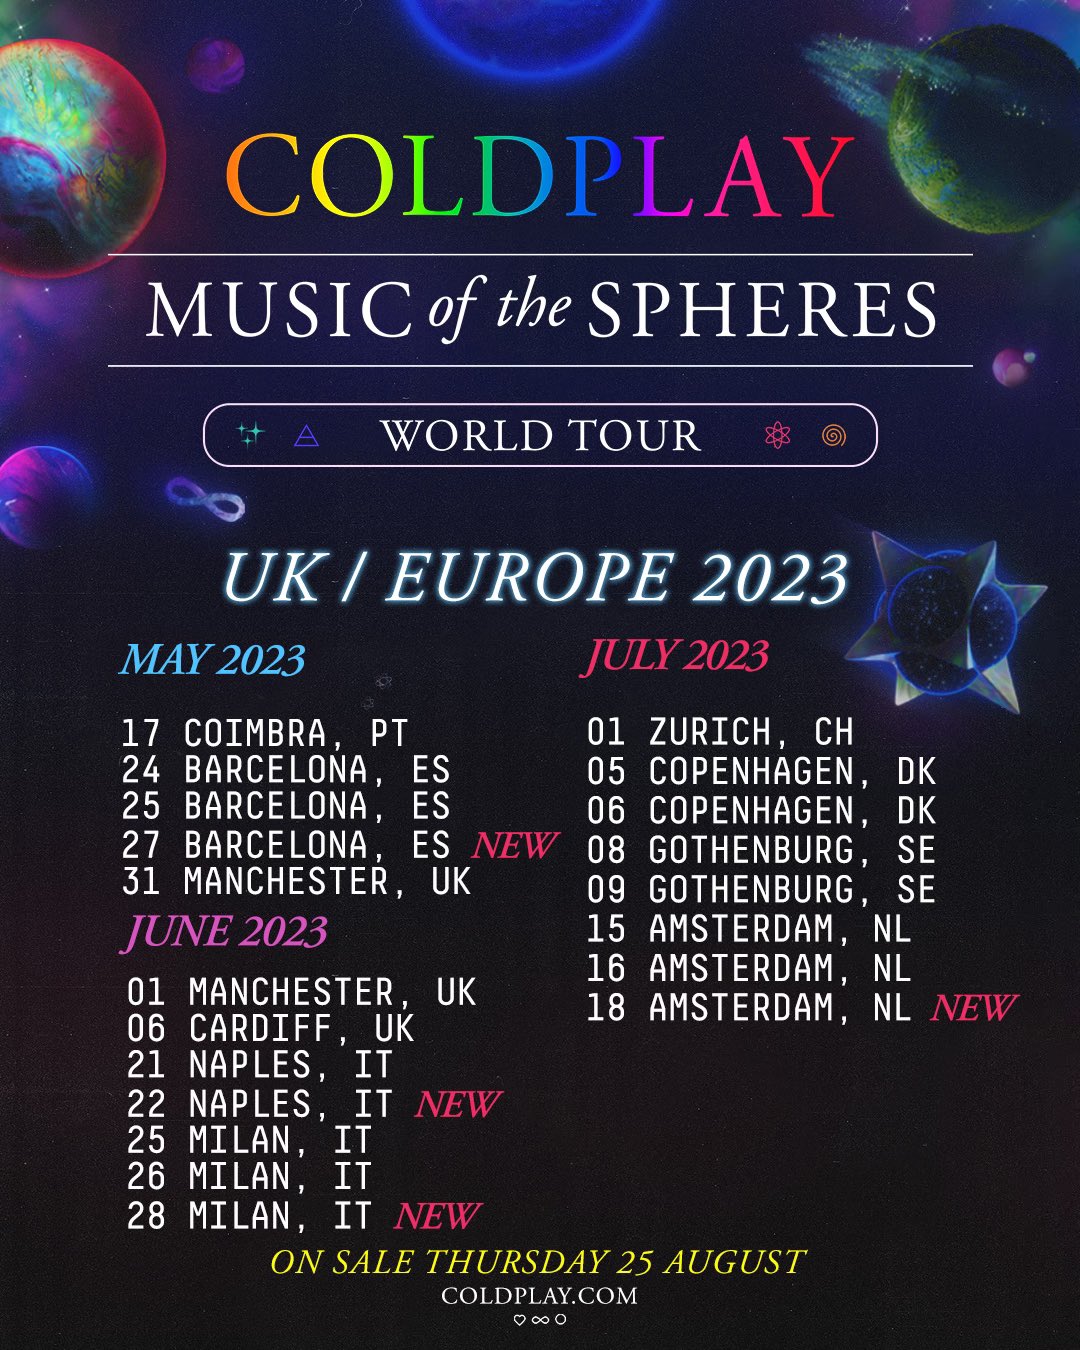 Coldplay on X: "Due to incredible interest in the  UK/European